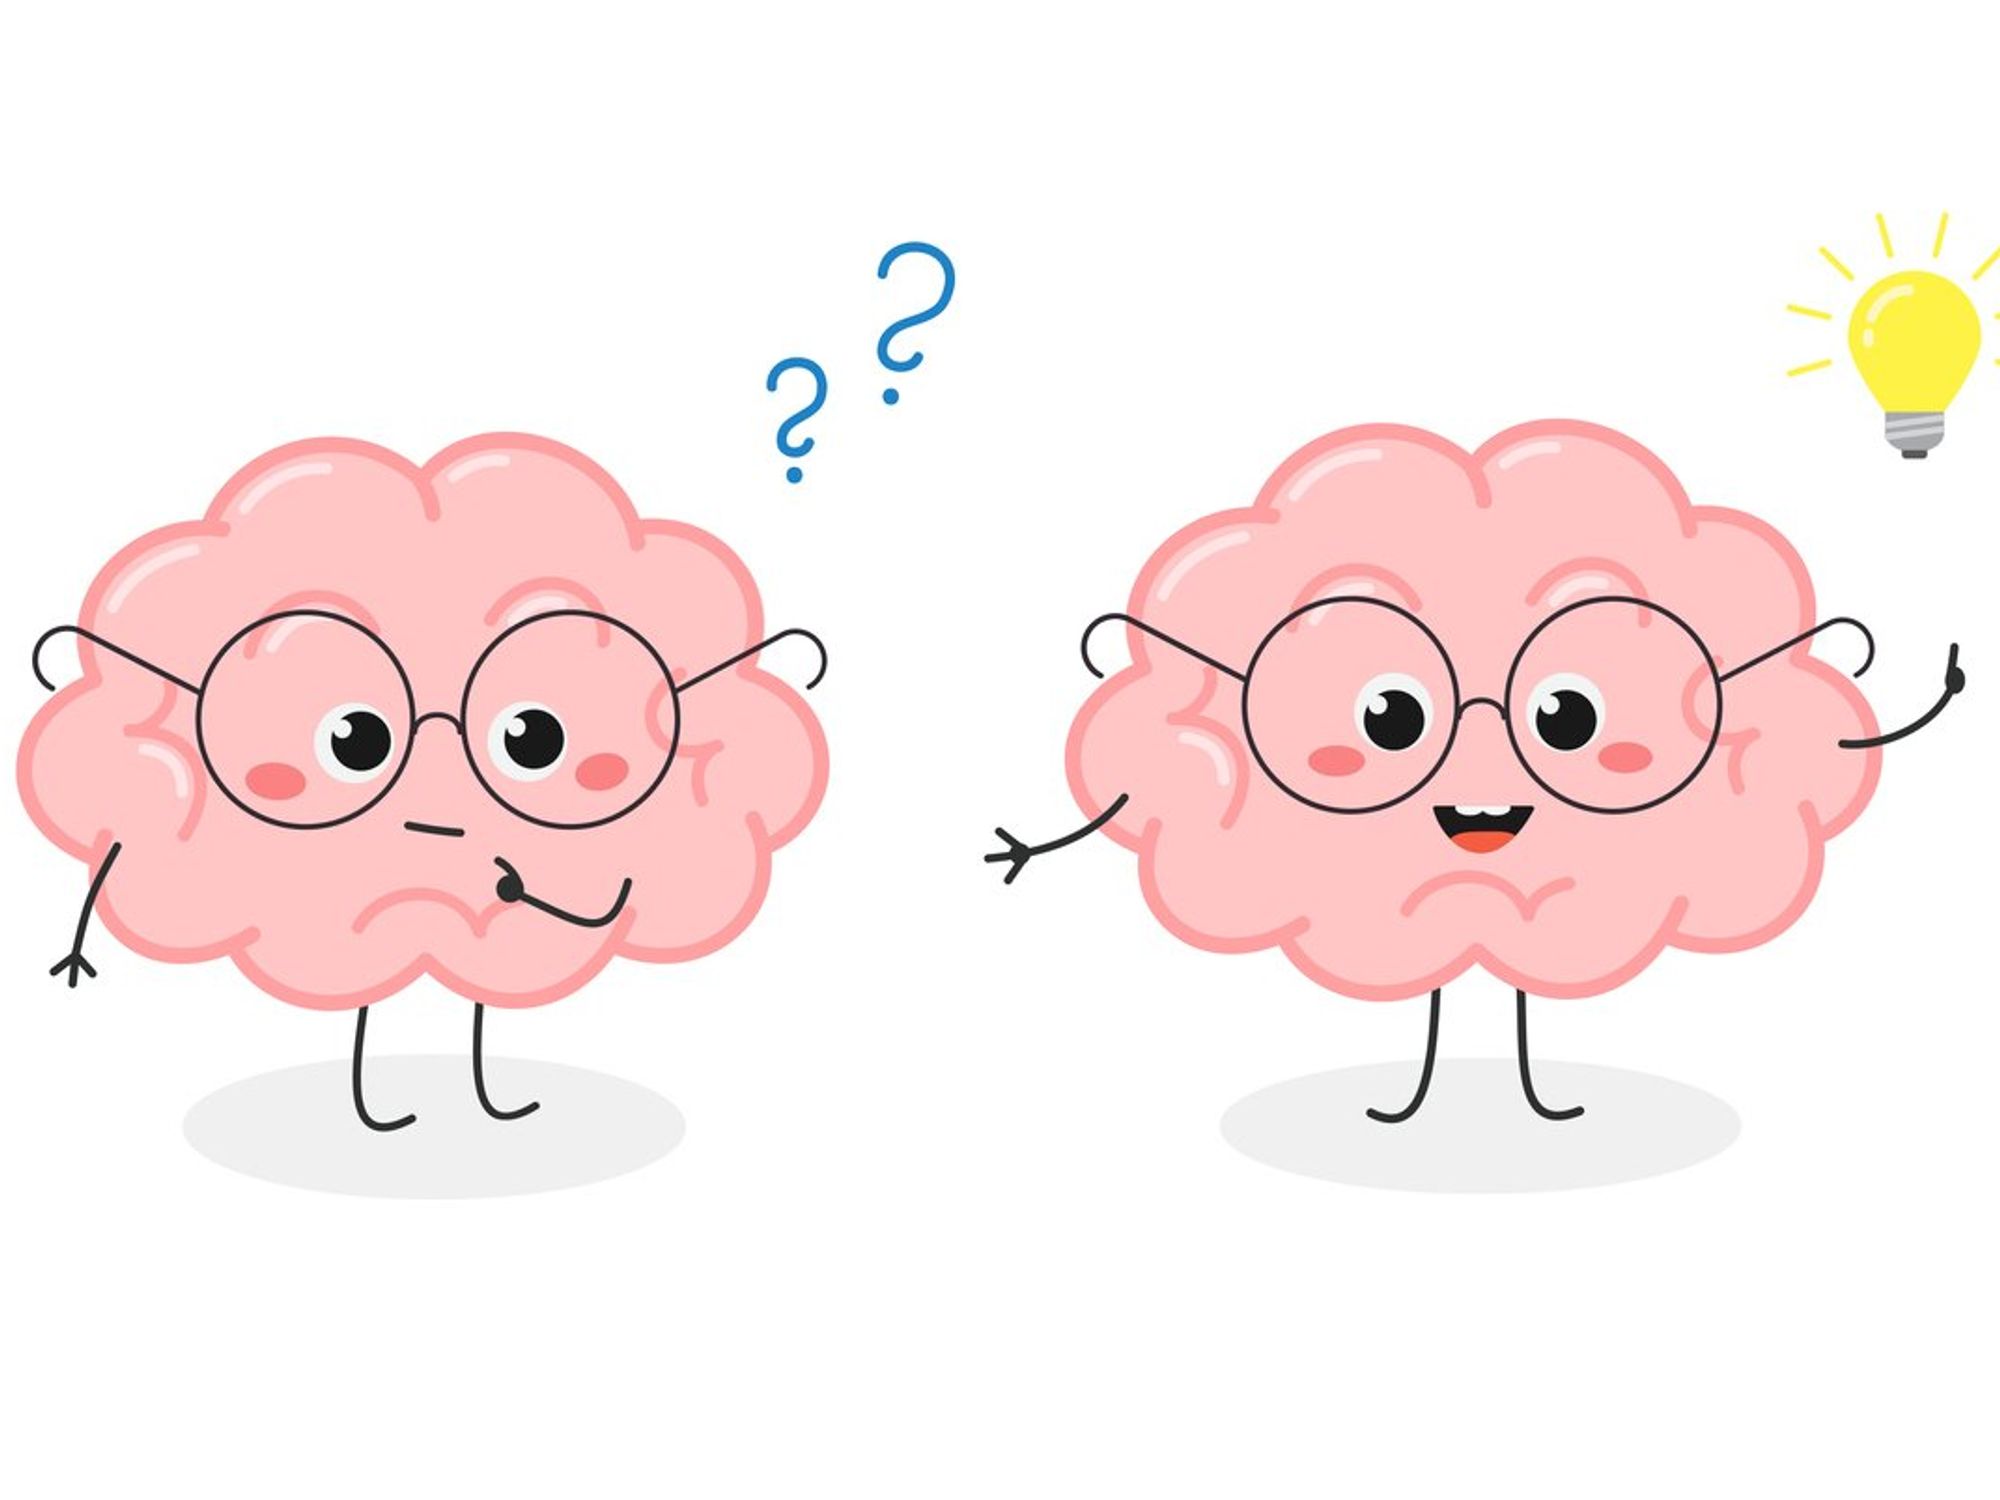 Funny nerdy brain character in glasses finding a solution concept with question mark and lightbulb idea symbol